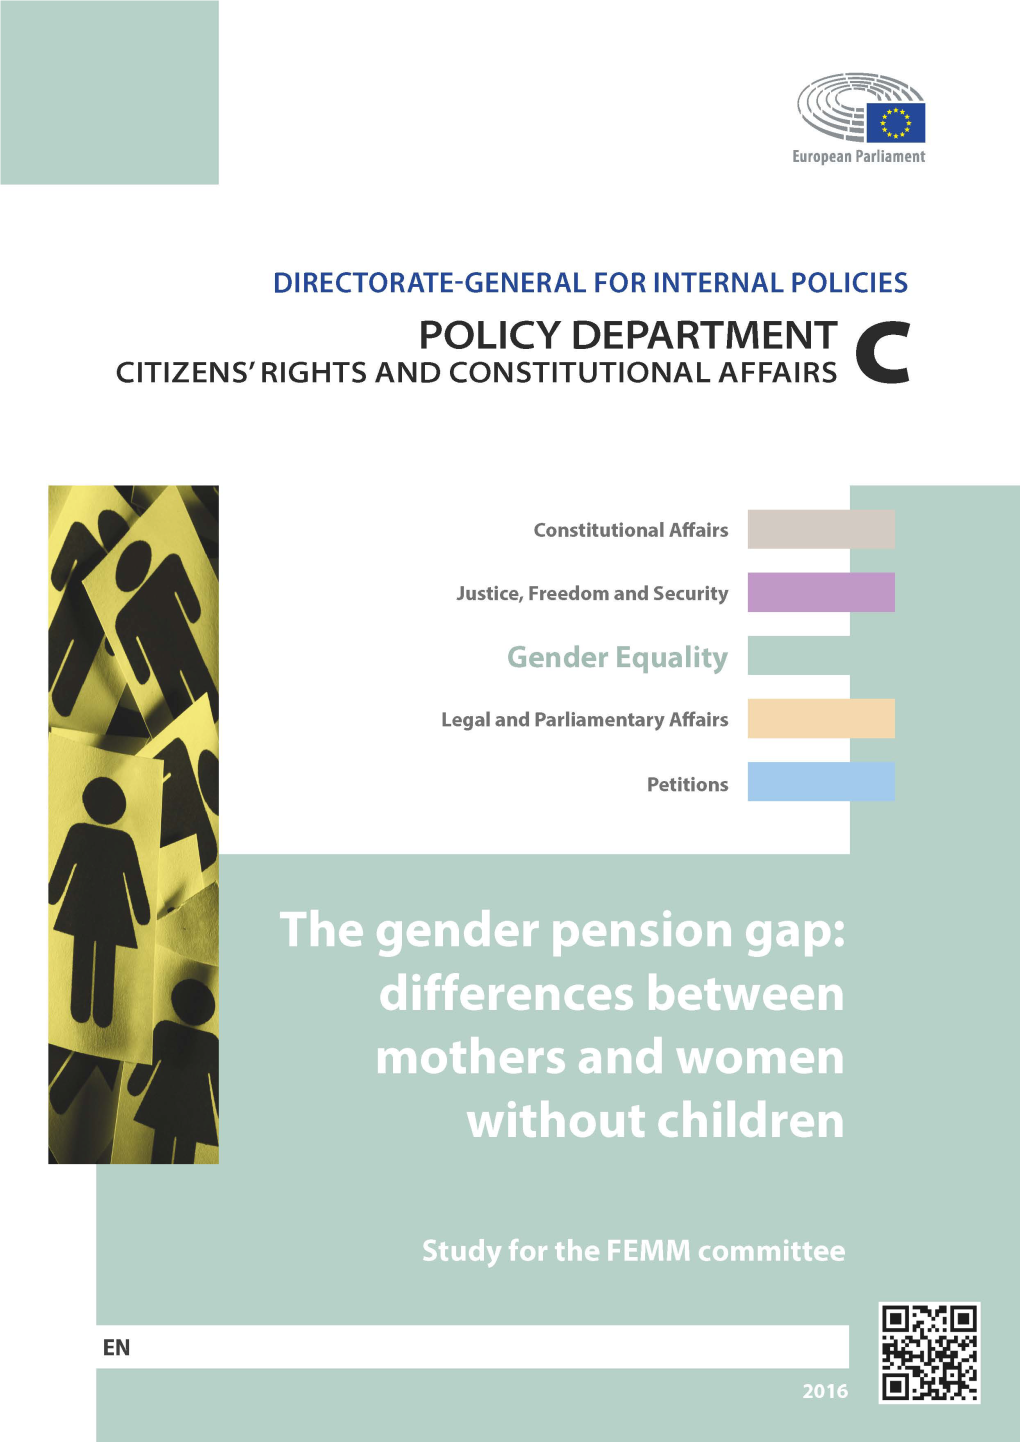 The Gender Pension Gap: Differences Between Mothers and Women Without Children